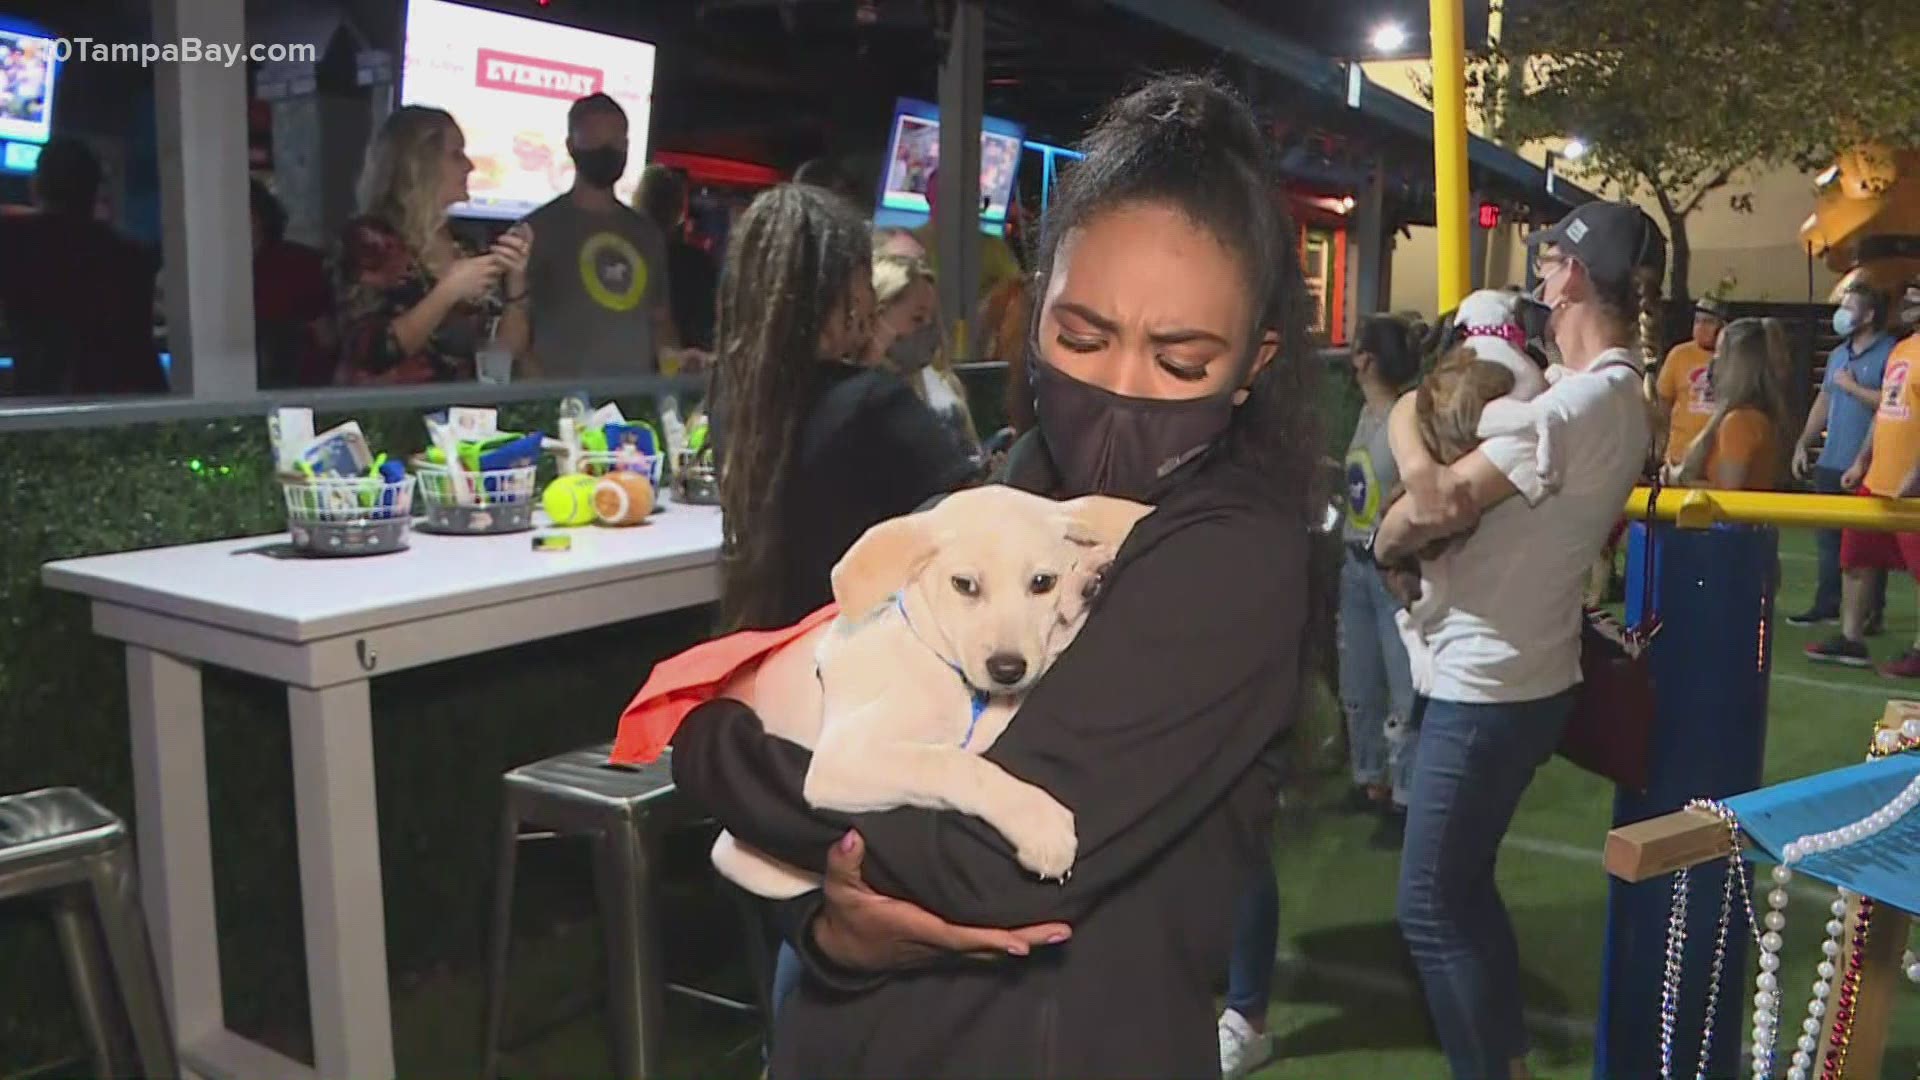 As 10 Tampa Bay reporter Emerald Morrow tells us, the second-biggest event in town this weekend is surely the first annual Pups Pub Bowl at Pups Pub in Tampa.